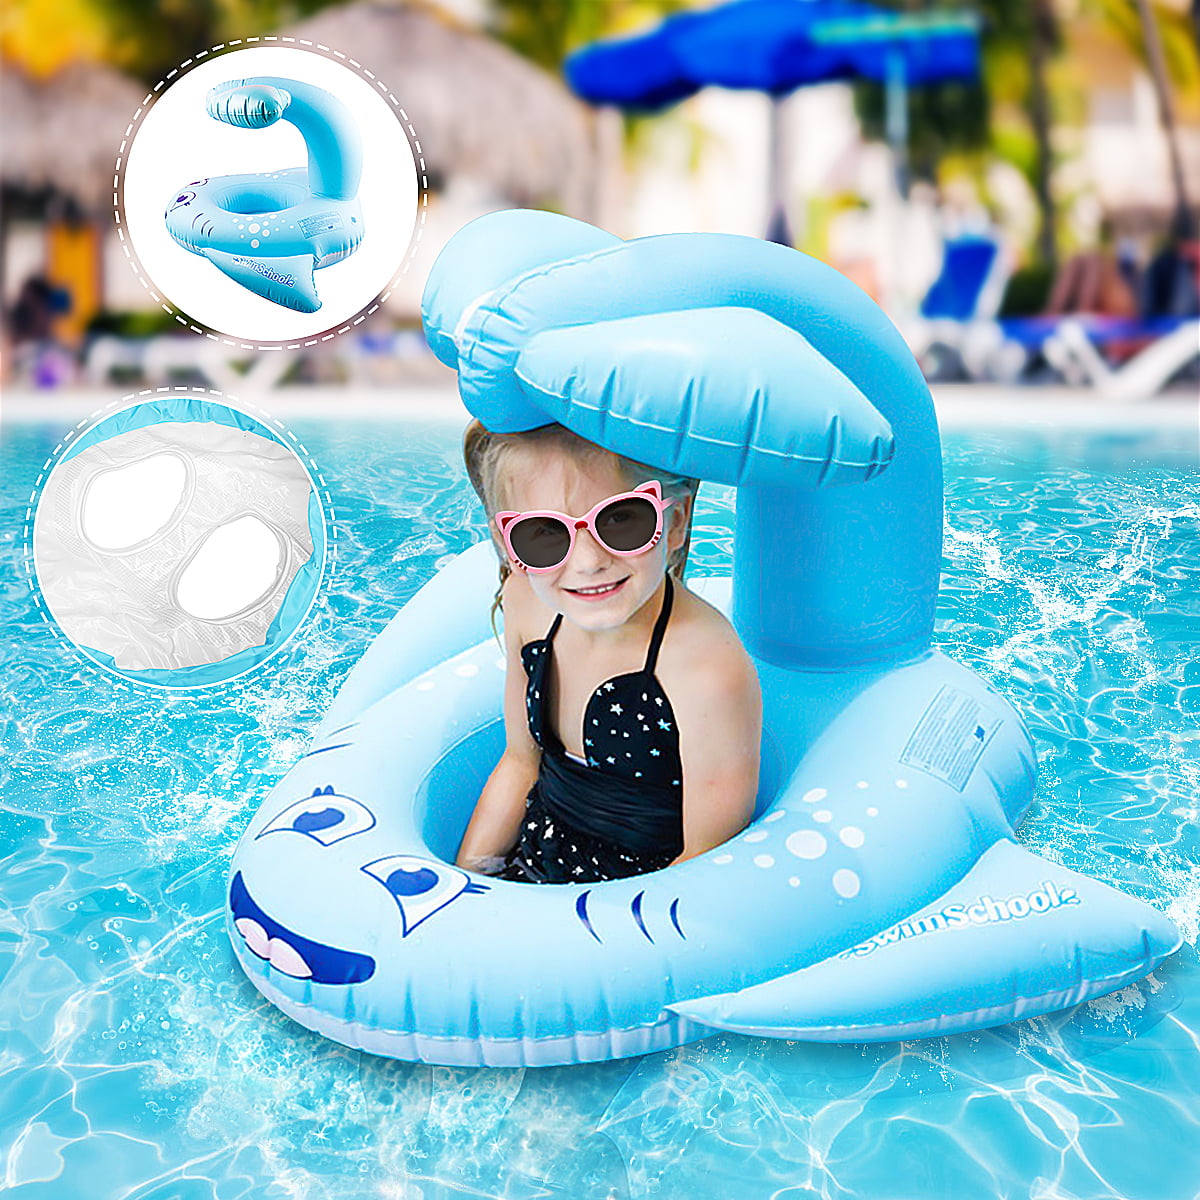 Details about   Poolmaster Learn to Swim Snail Baby Rider Swimming Pool Float 81562 